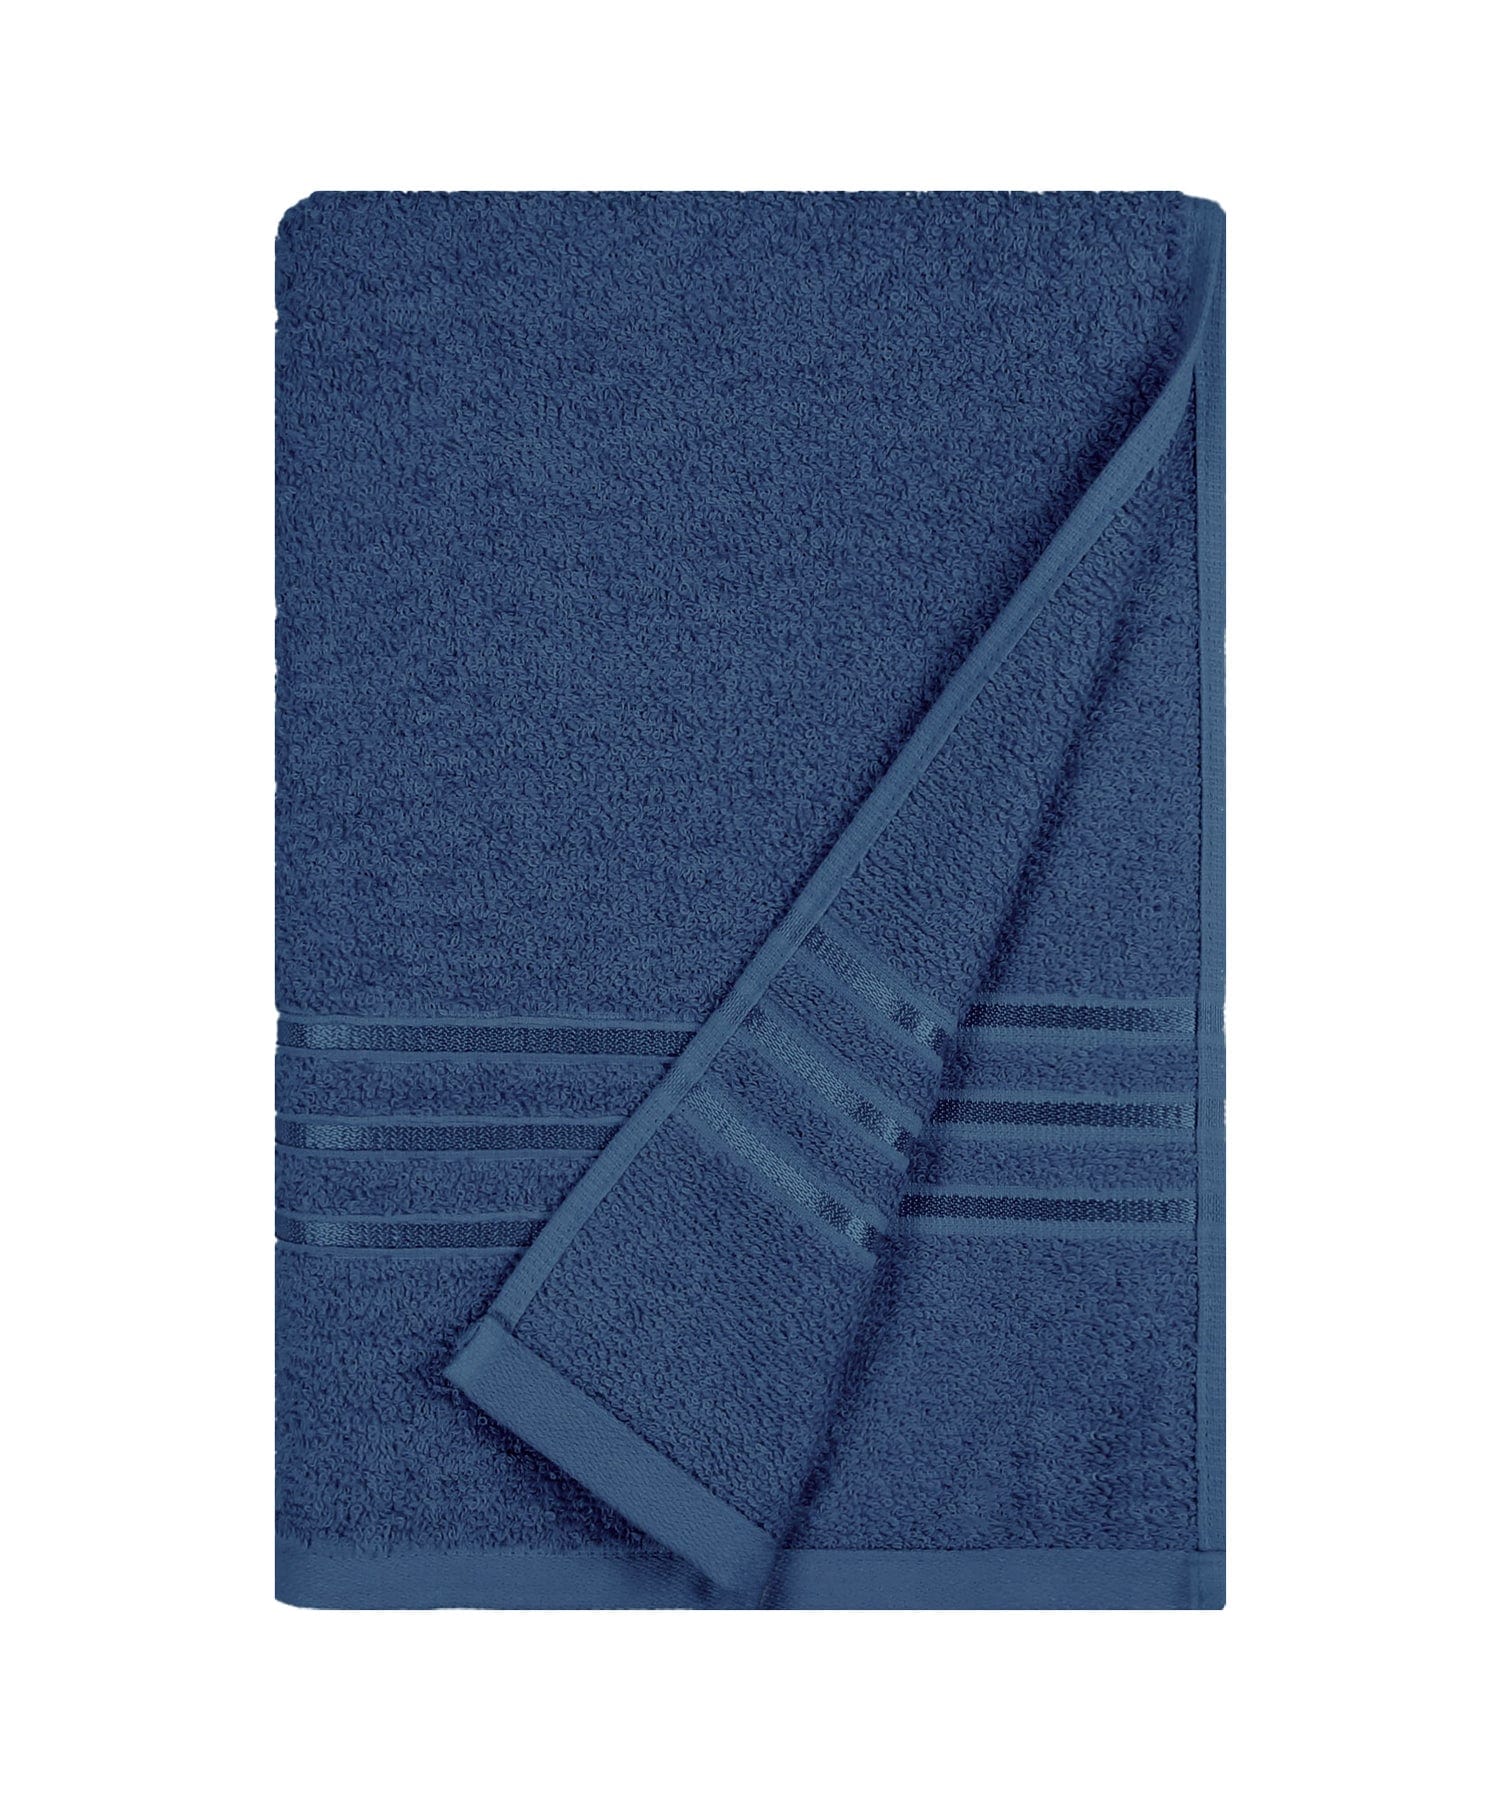 COMFORT LIVING TOWELS,100% Cotton,Quicky Dry,Light Weight, NEW NAVY